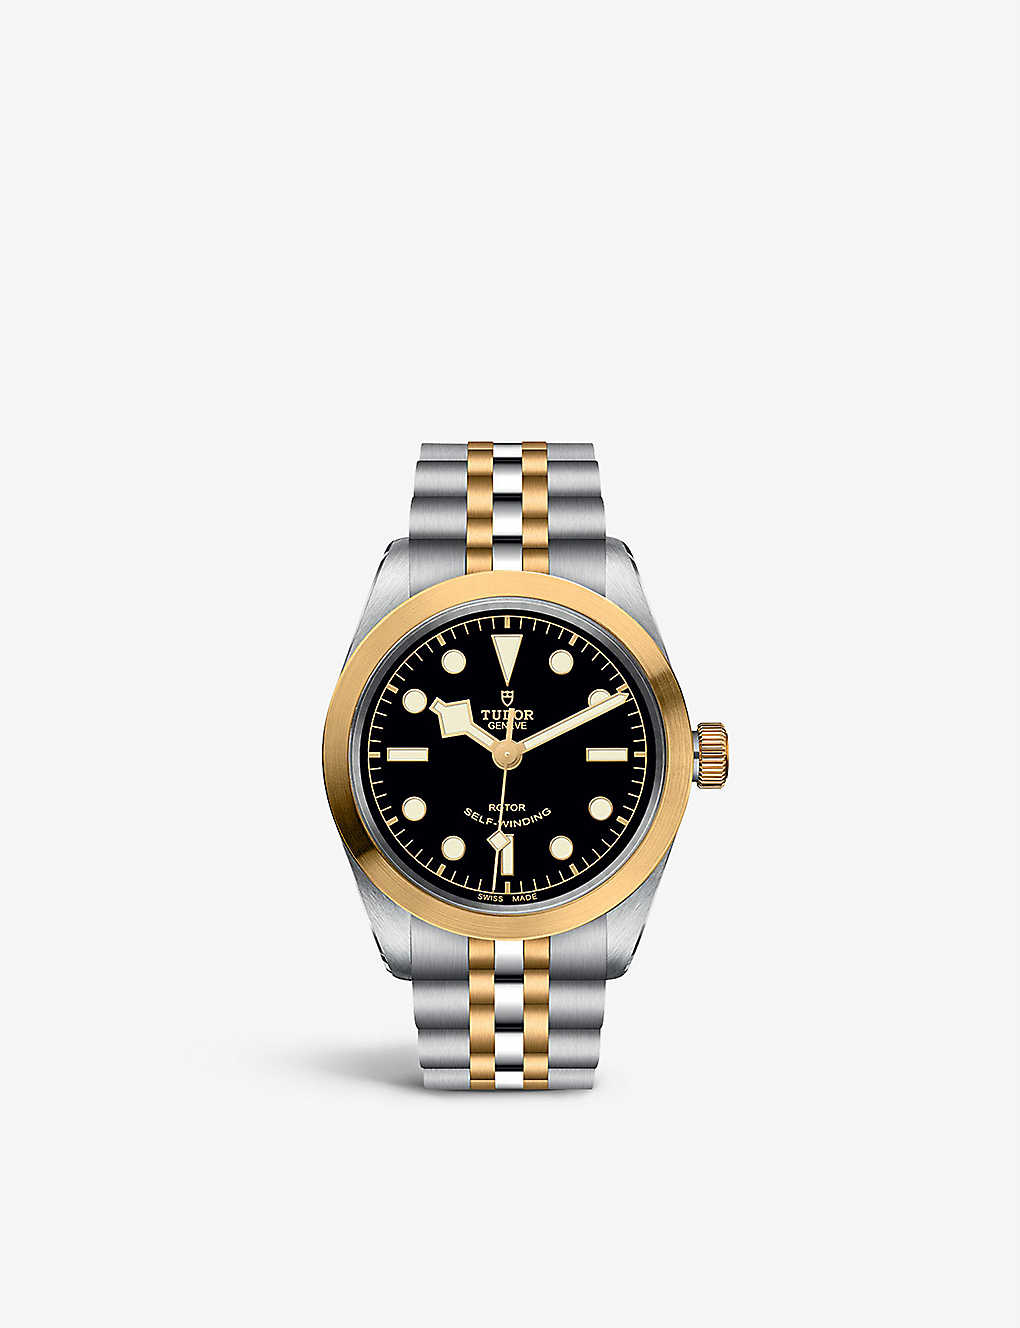 M79503-0001 Black Bay 36 18ct yellow-gold and stainless-steel automatic watch(9087554)